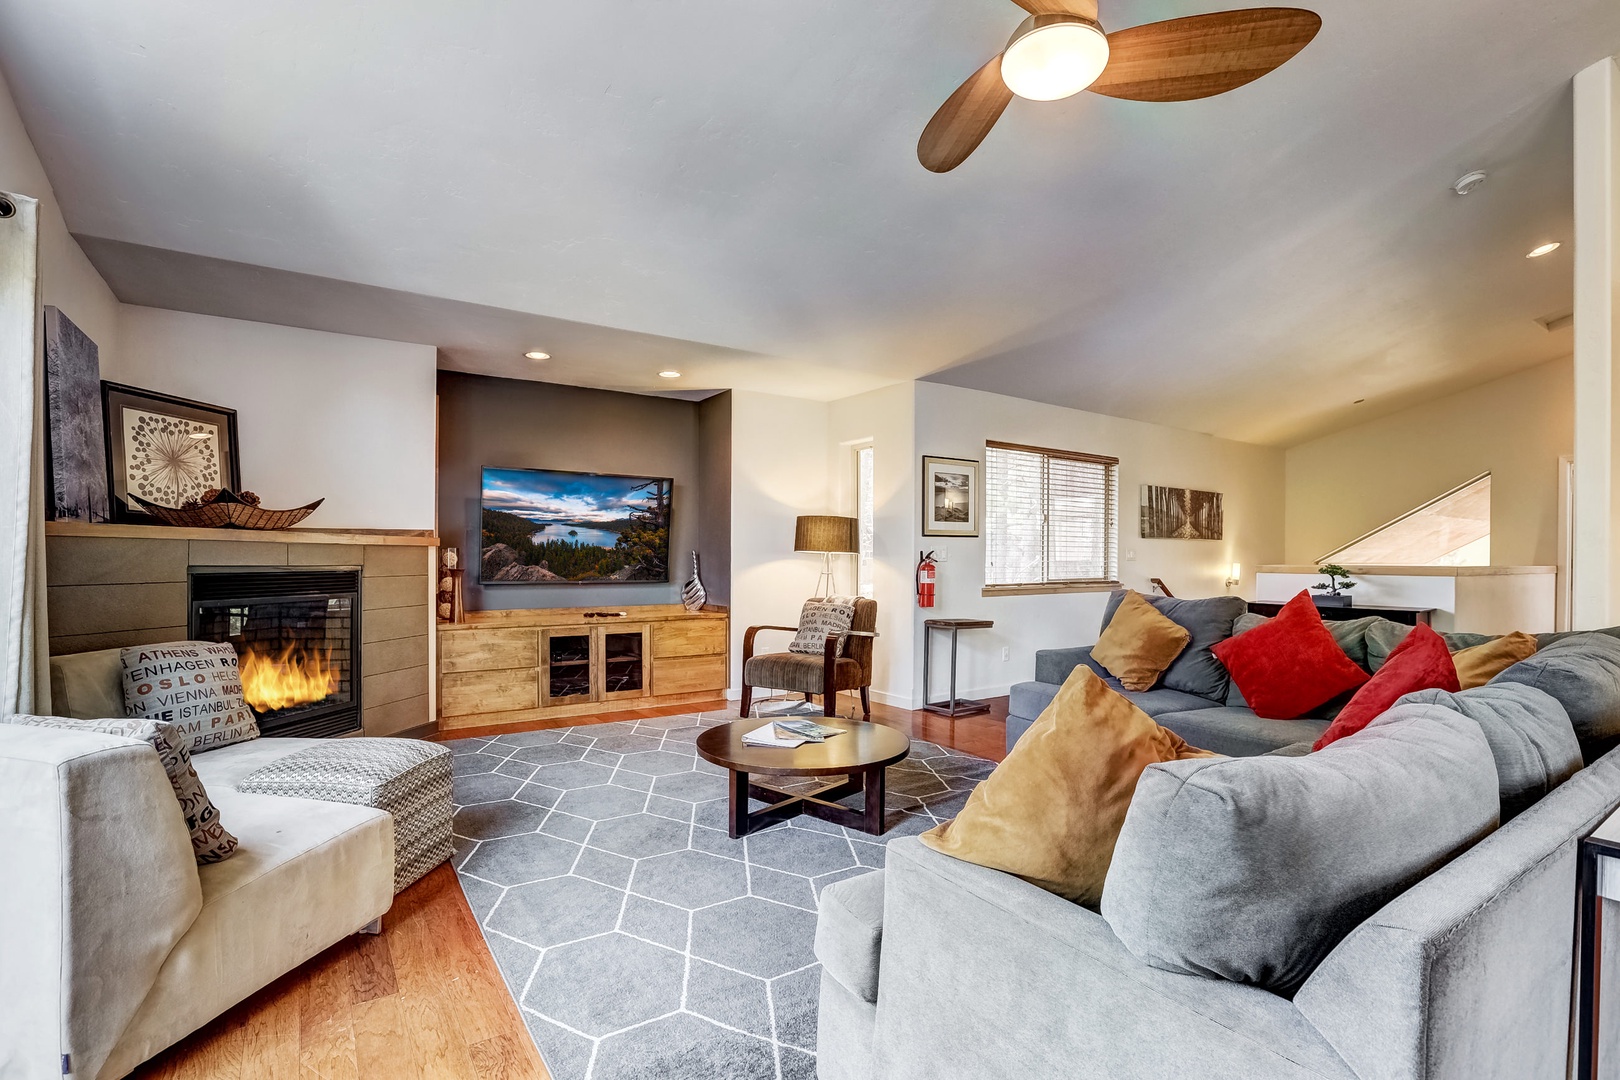 Cozy living room with fireplace, TV, DVD player